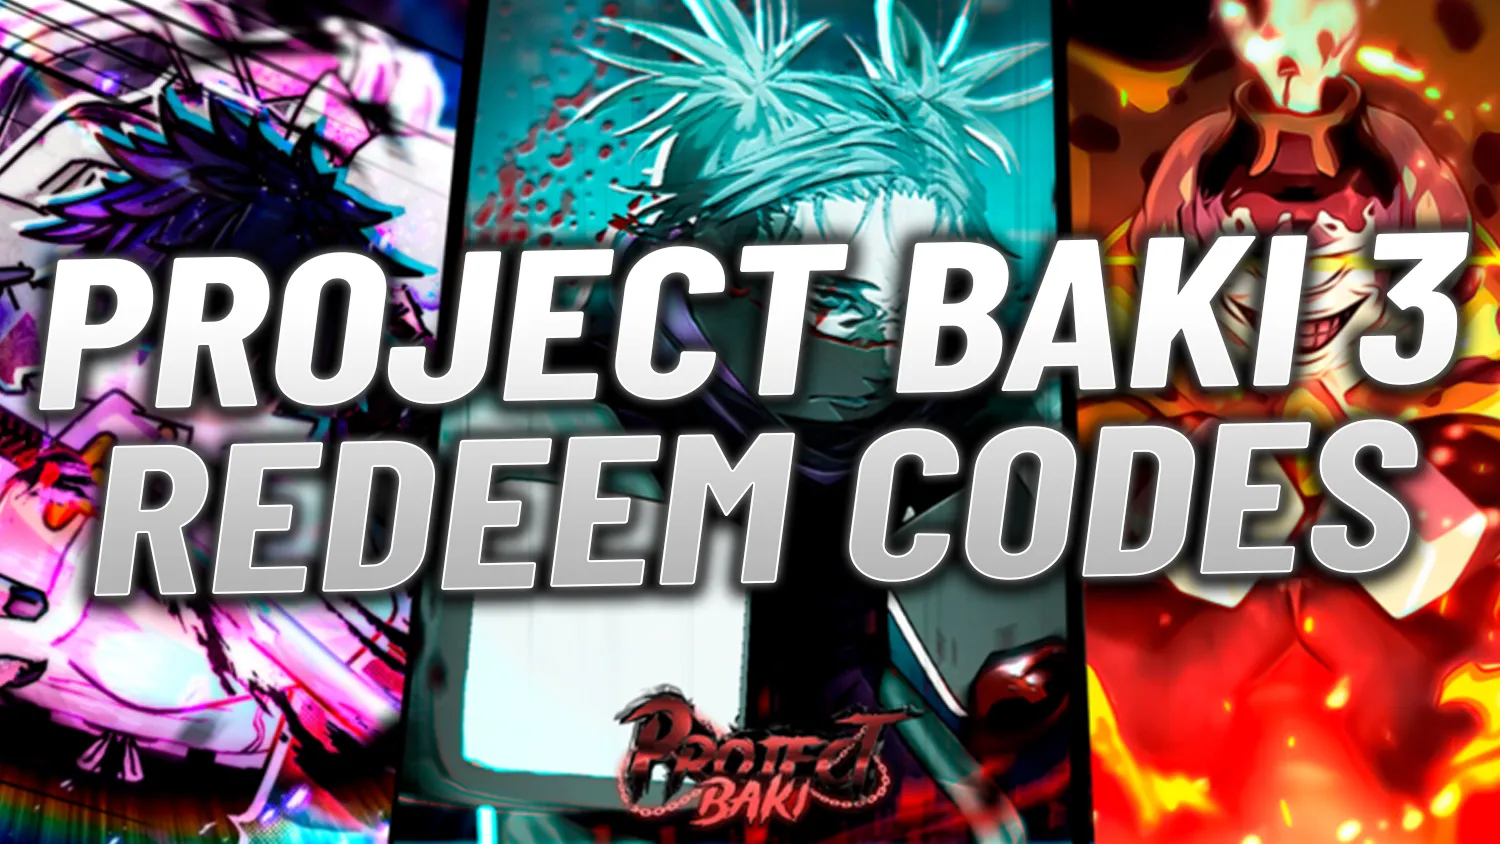 Project new world redeem codes new, Project redeem code